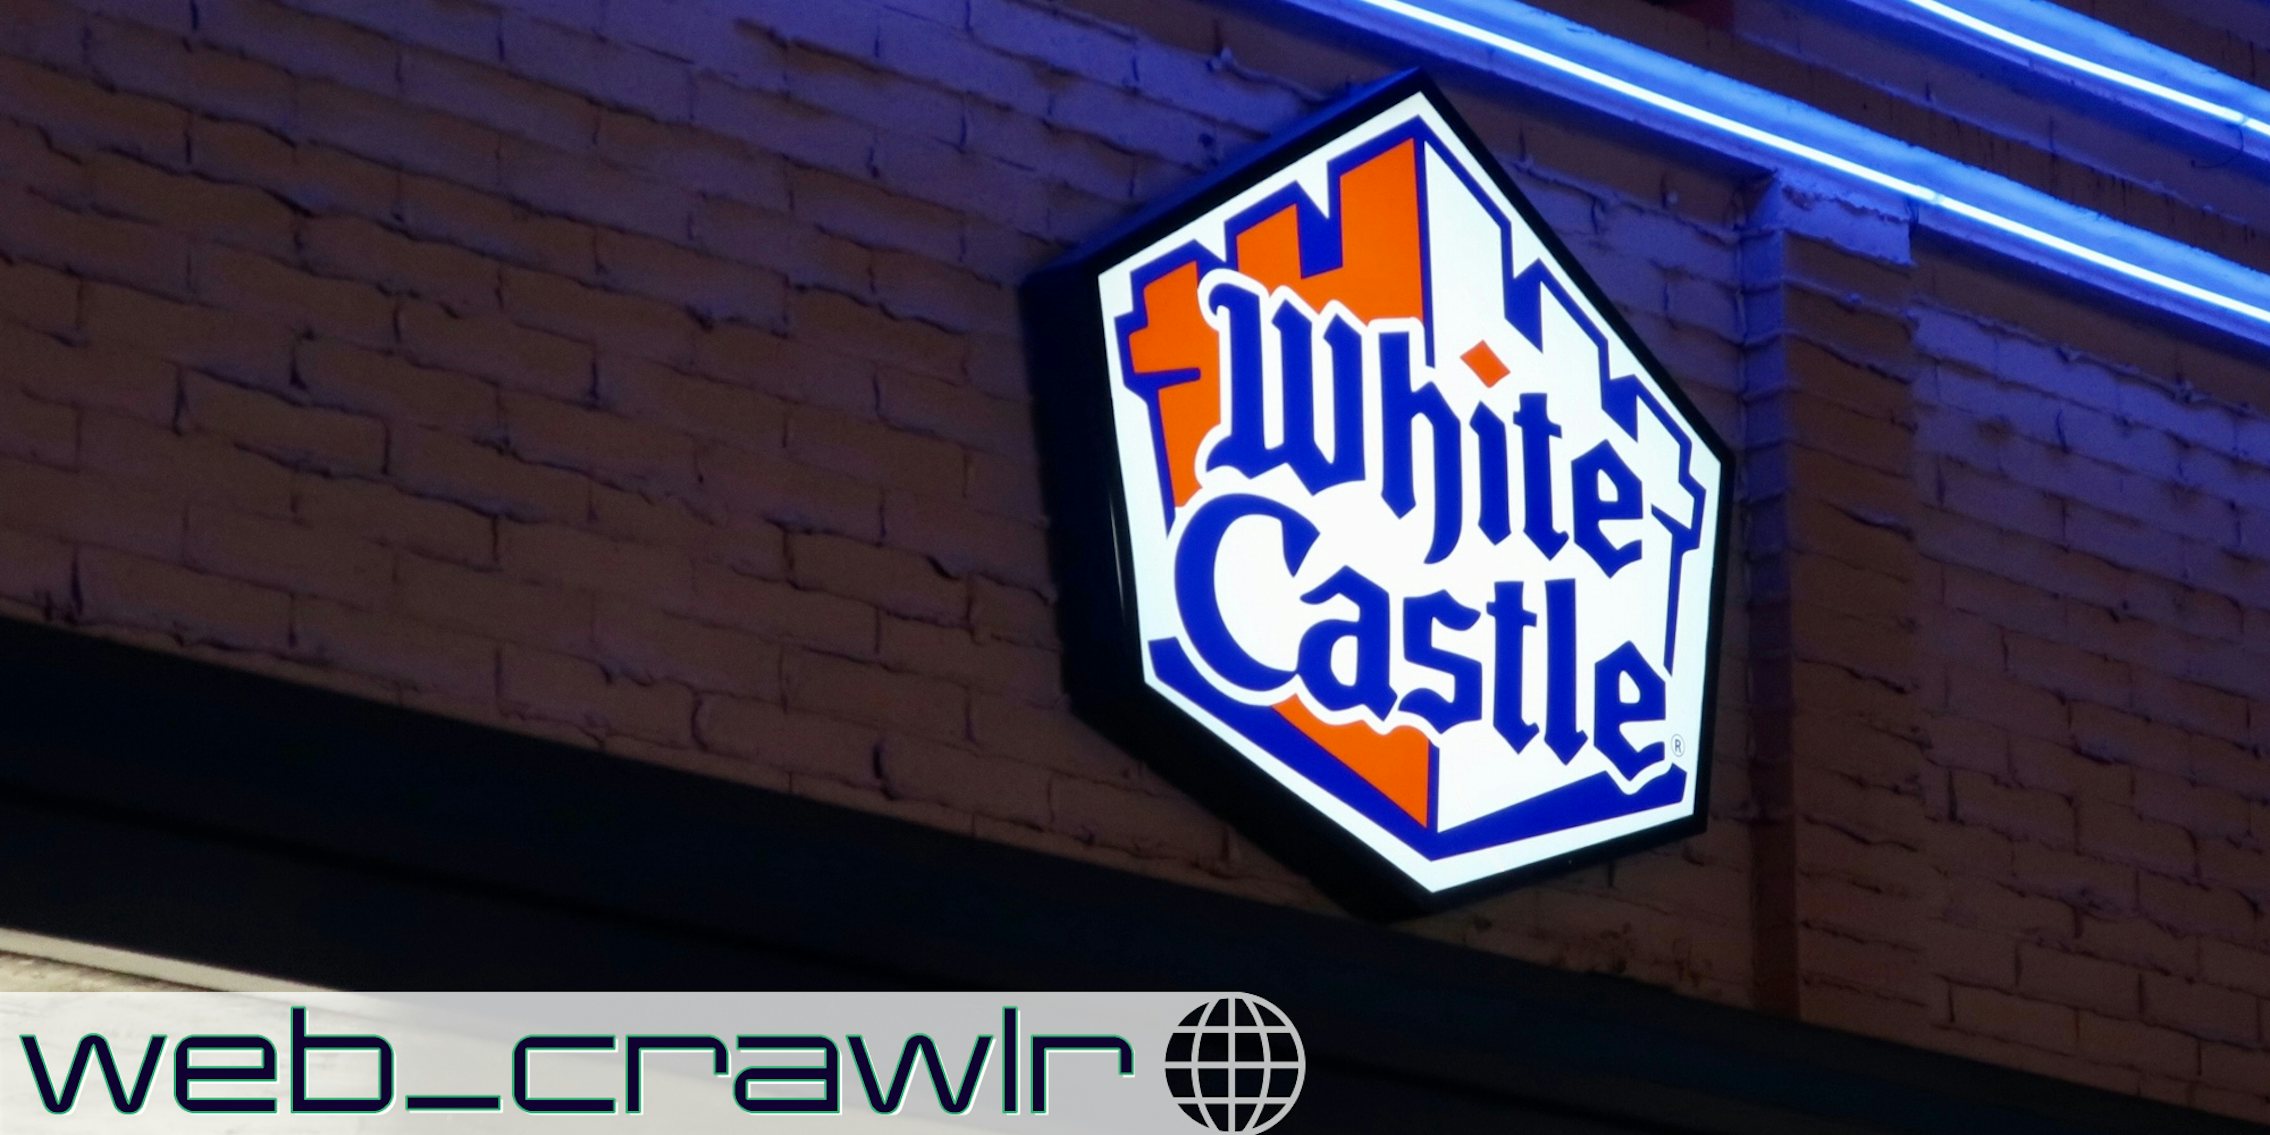 A White Castle sign next to neon lights. The Daily Dot newsletter web_crawlr logo is in the bottom left corner.